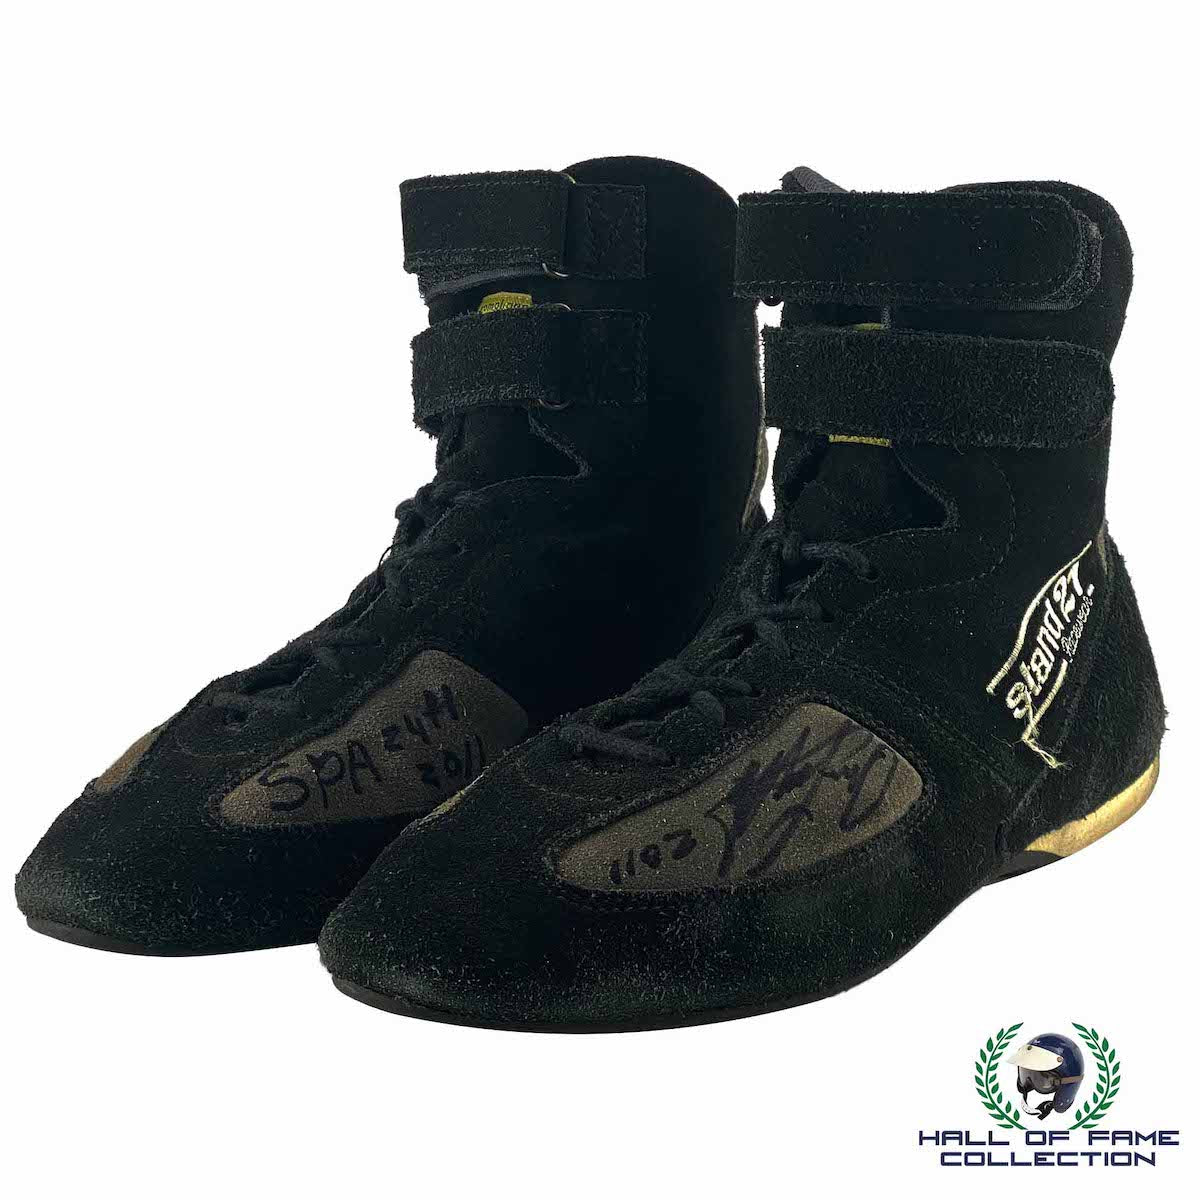 2011 Arie Luyendyk Signed Race Used Spa 24hr Race Stand 21 Sportscar Racing Boots